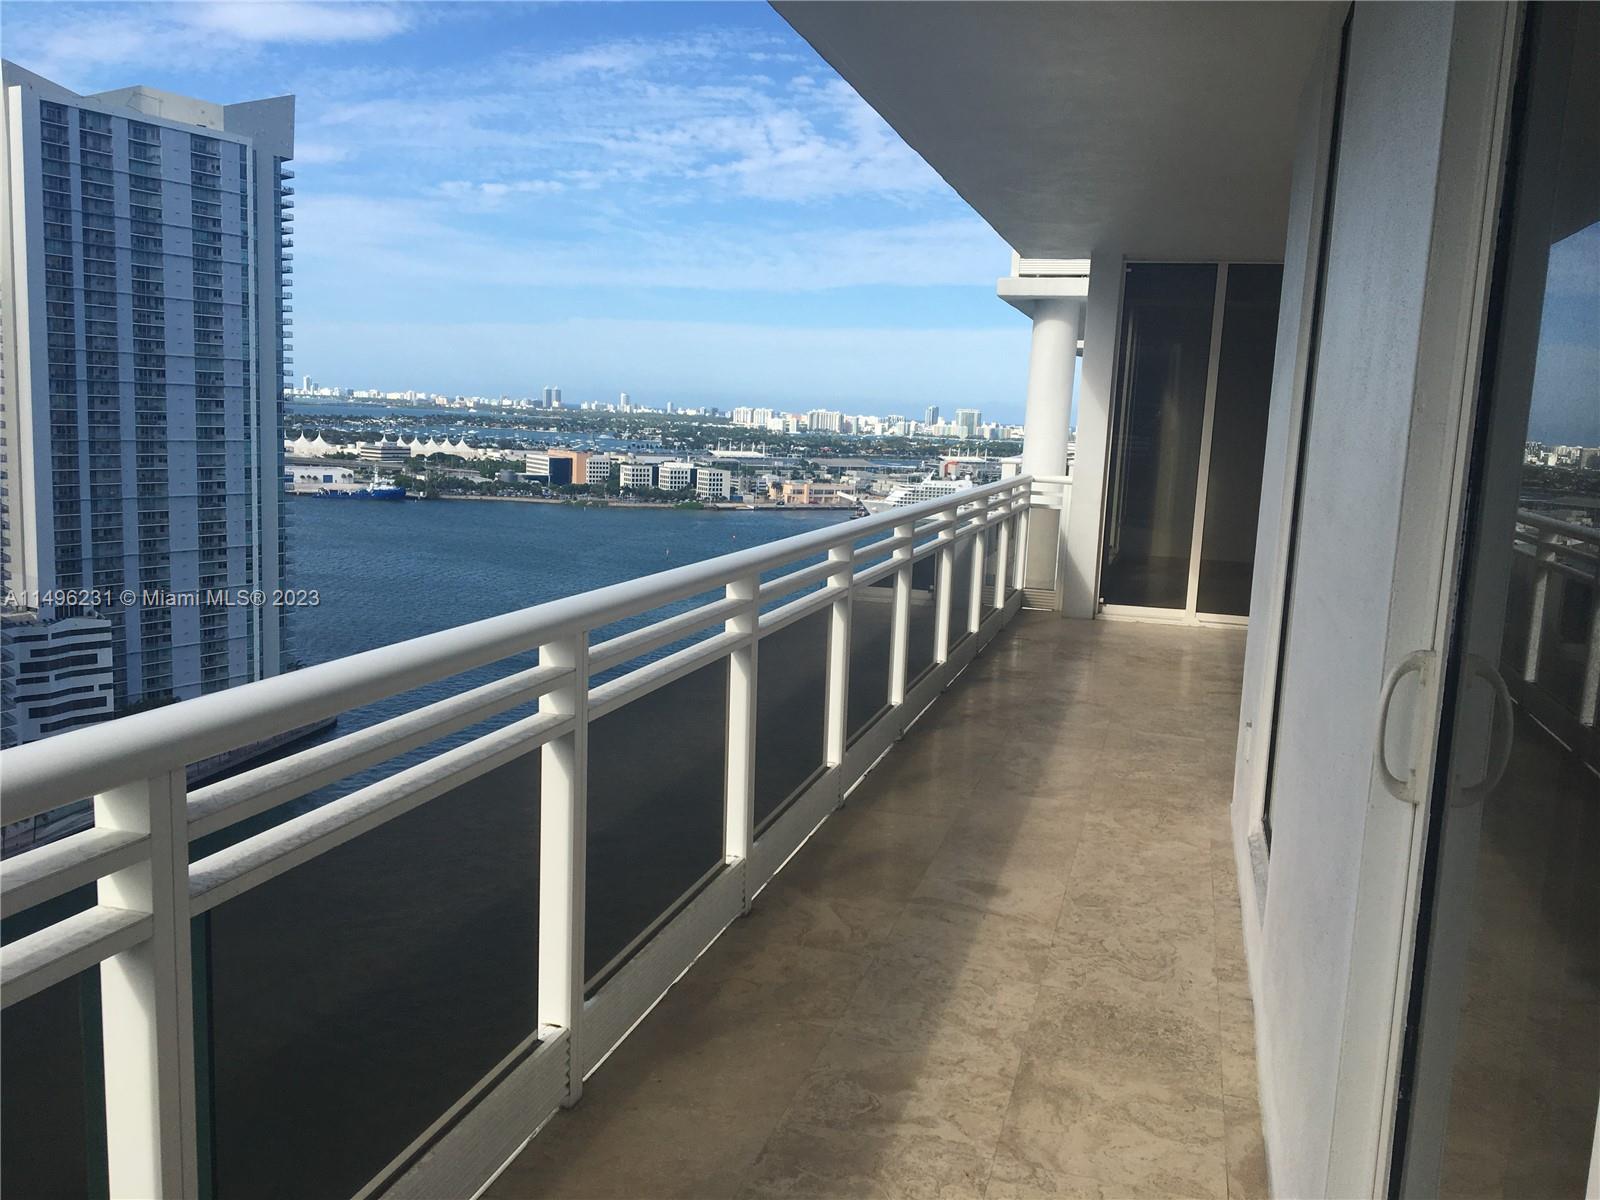 SPECTACULAR BAY VIEWS from this 27th-floor apartment at the luxurious CARBONELL on exclusive Brickell Key!!! 2BED/2.5 BATH over 1500 sq. ft under A/C. -HUGE BALCONY -- "COMPLETELY NEW WHITE KITCHEN" --" NEW APPLIANCES" --"NEW WHITE CUSTOMS CLOSETS" and some more details. THE UNIT IS READY TO MOVE IN.--- All rooms have access to the oversized balcony. Marble floors throughout the apartment, 1 PARKING.- NO PETS --CARBONELL offers a State-of-the-Art 2-story gym, racquetball court, basketball court, resort-style pool deck with BBQ area, and two tennis courts, golf putting area, kids rooms, party room, conference room, concierge, free valet for all guests. Enjoy the constant activity of boats and ships from the Miami River. Views of Biscayne Blvd, Port of Miami, and Miami Beach.